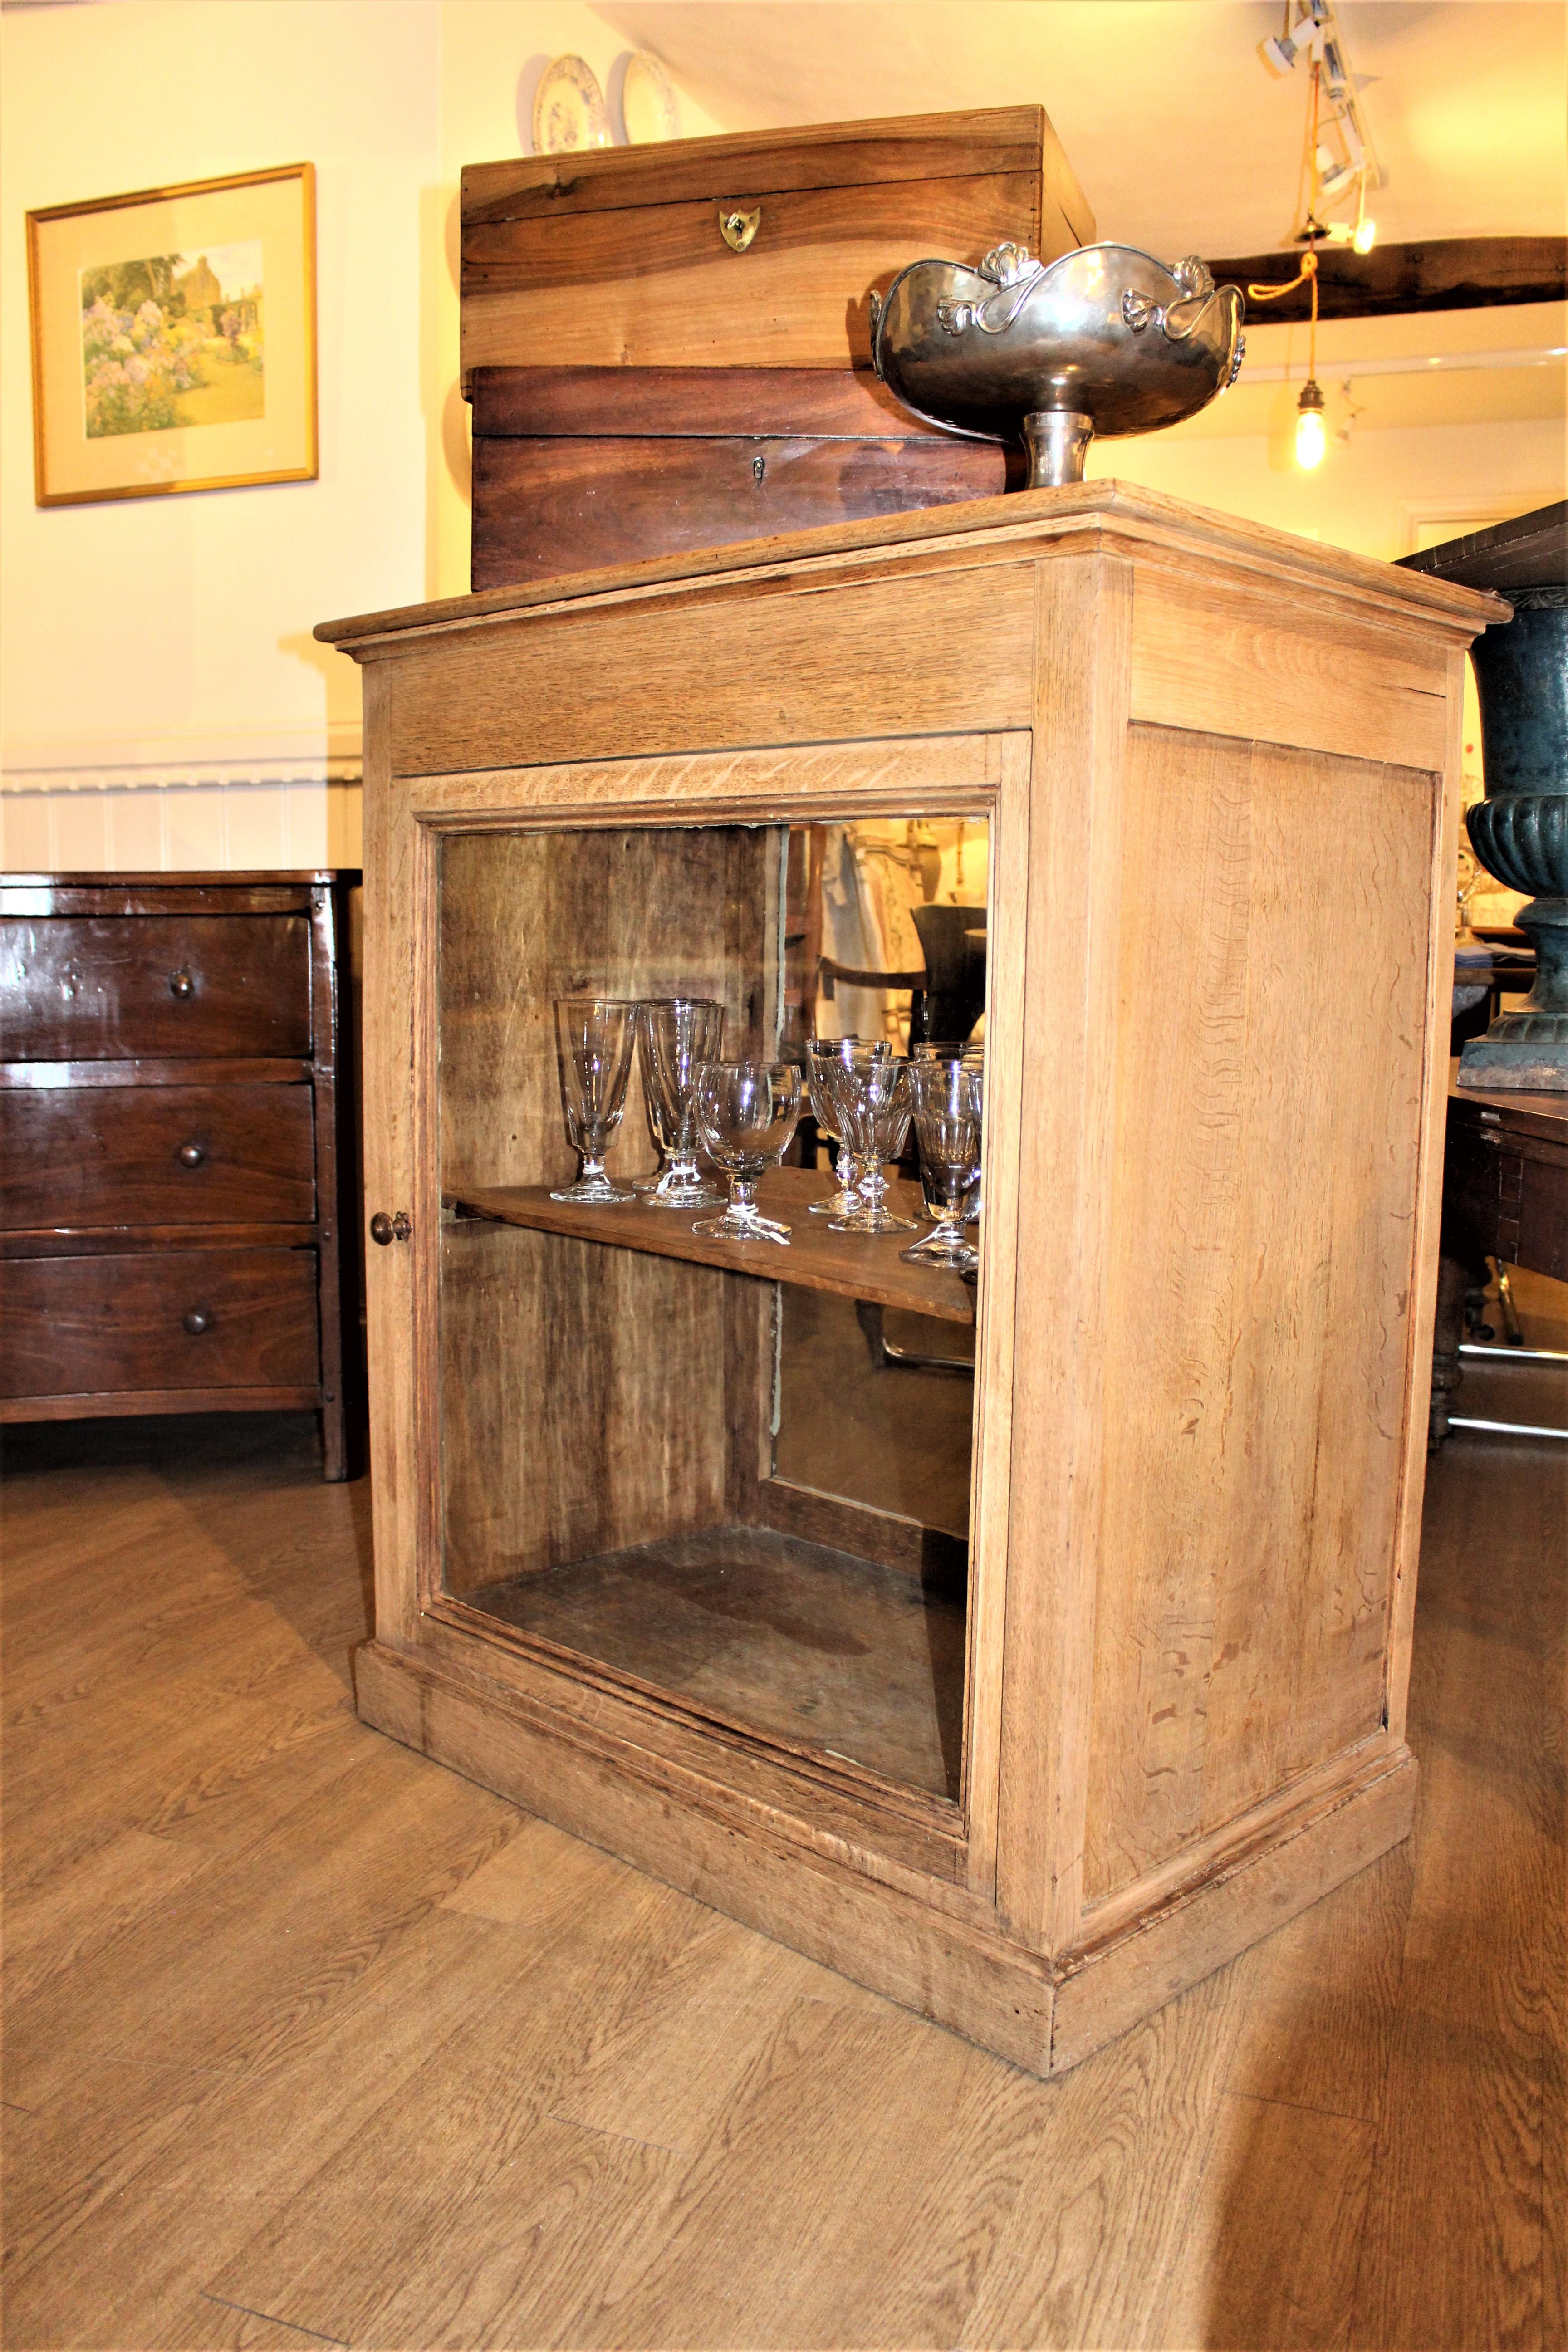 This French shop counter was dark oak and has recently been bleached. It has a storage compartment under the lid, and a glass door with the original rippled glass at the front.
There is a removable shelf inside and glass on the back too (not